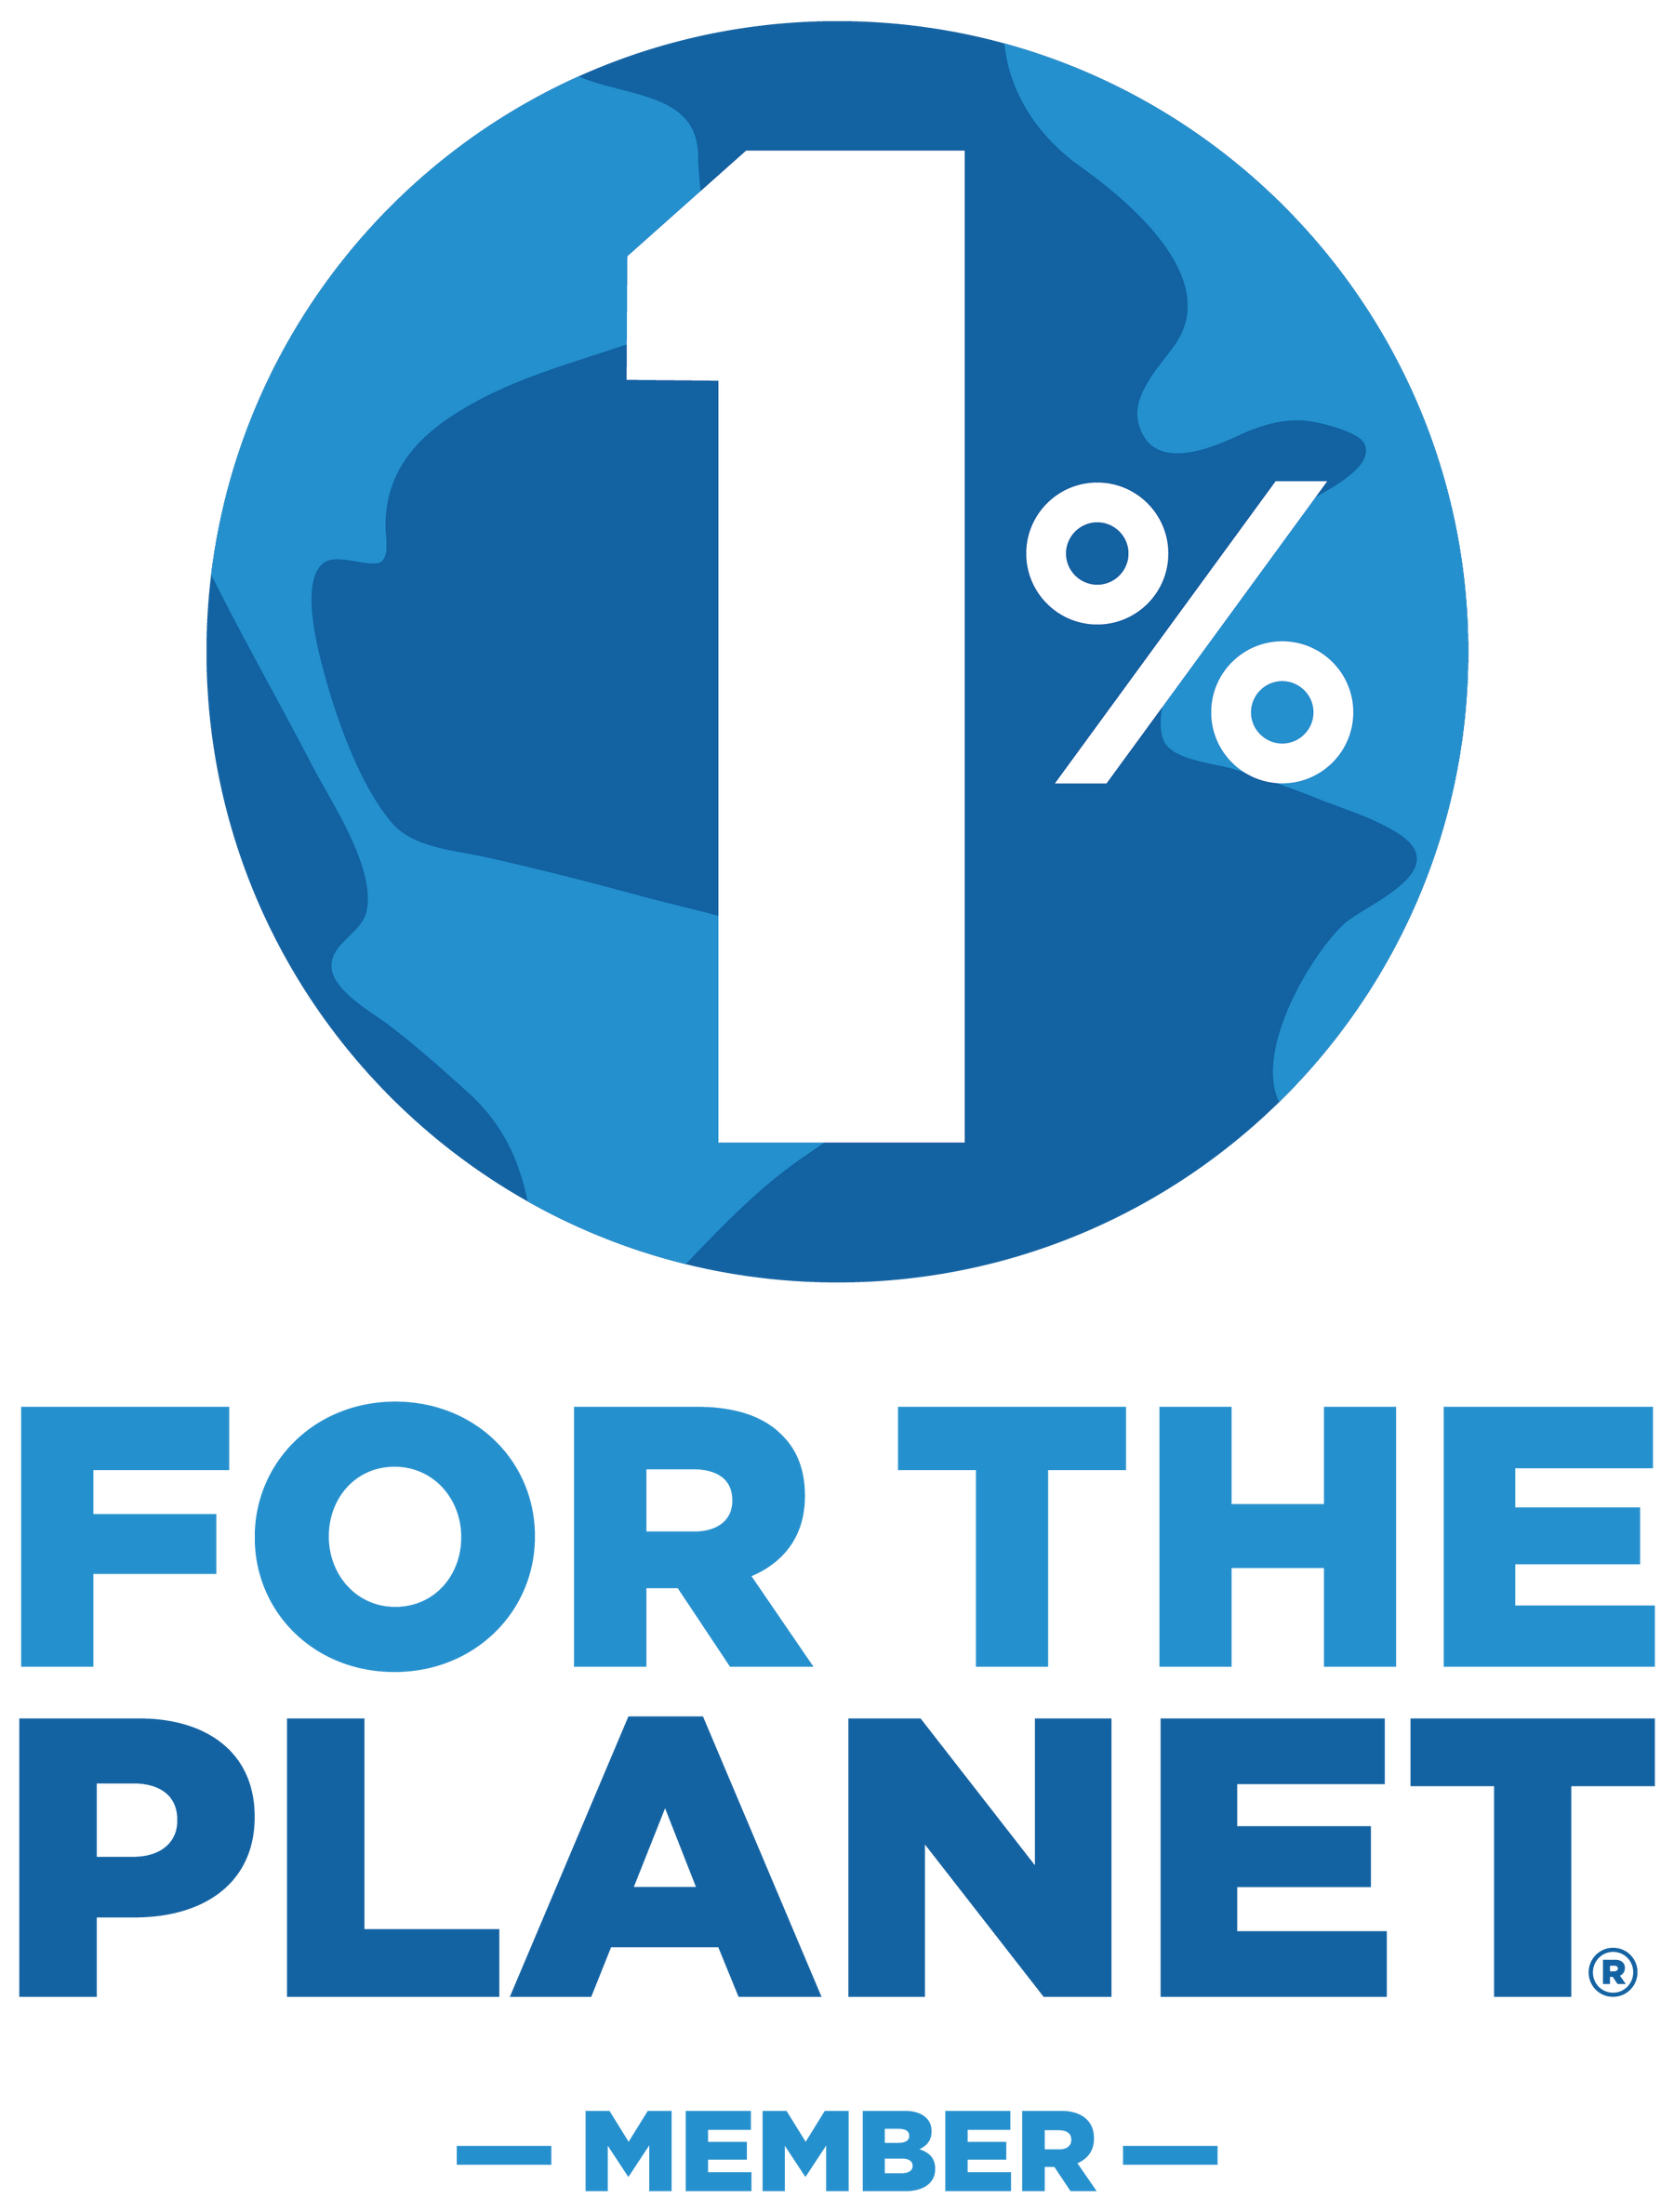 Heritage Bee Co is a proud member of the 1% For The Planet organization that works to give back to the planet.